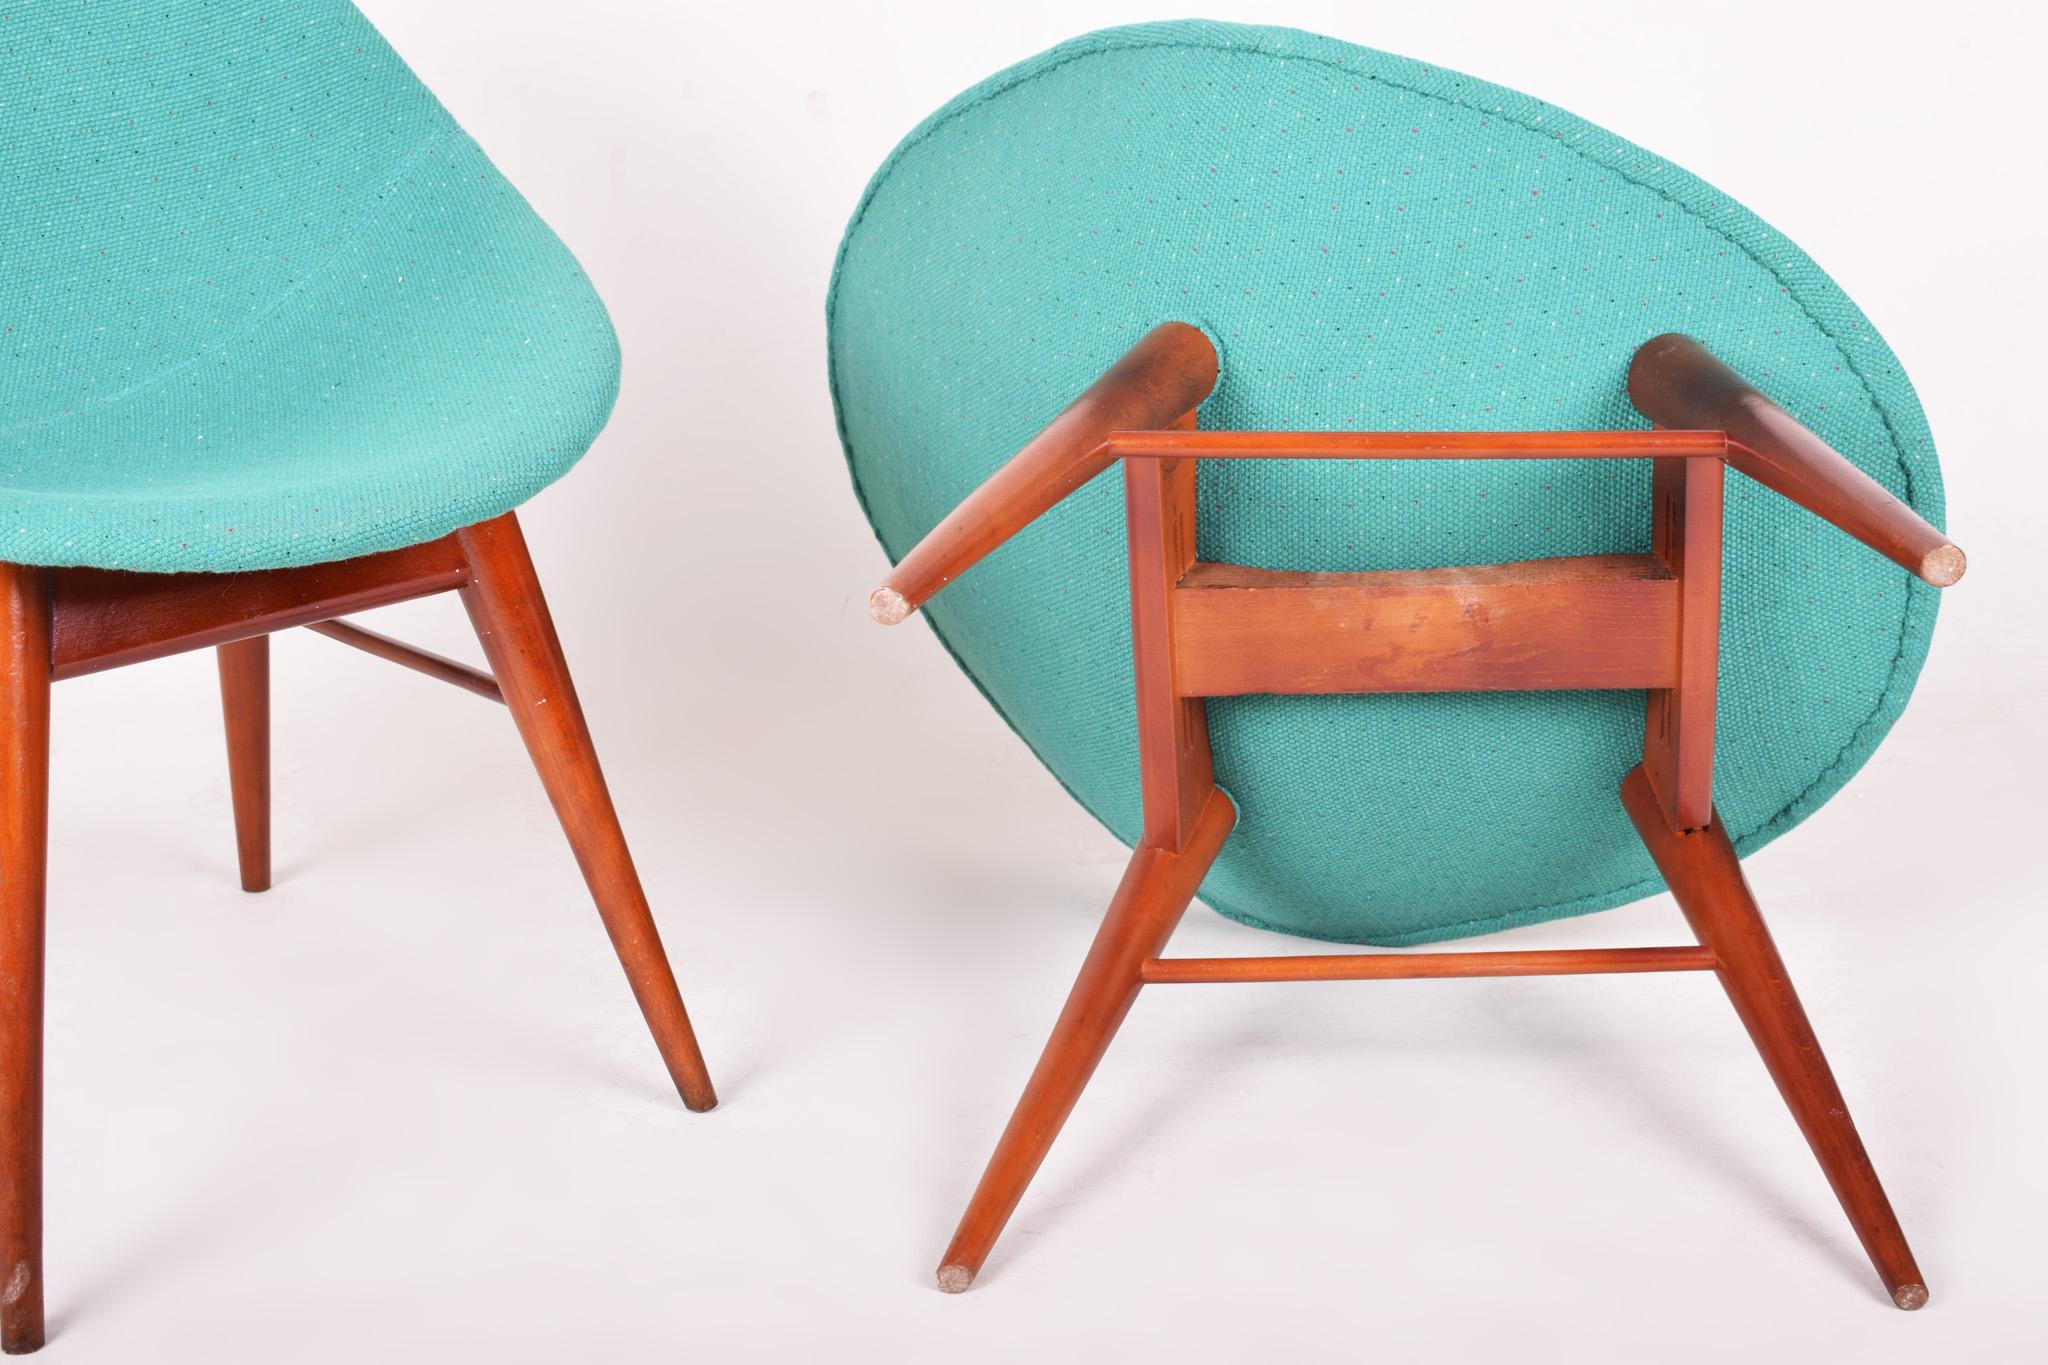 Pair of Blue Mid-Century Chairs, Made in 1960s Czechia, Fully Restored, Navrátil For Sale 1